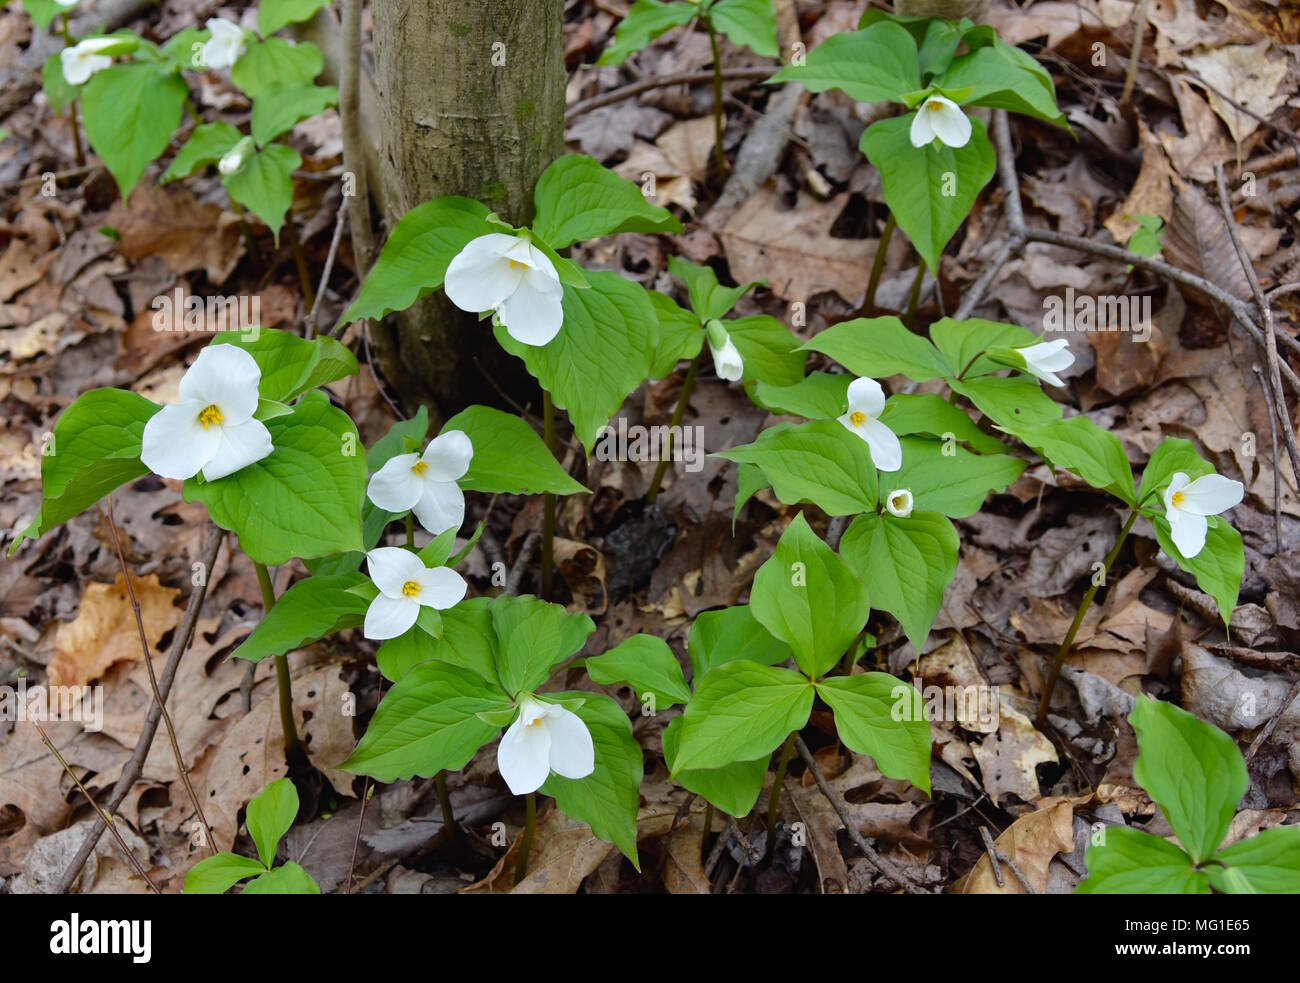 A cluster of bright large white trillium flowers and green leaves emerging in a spring forest. Stock Photo